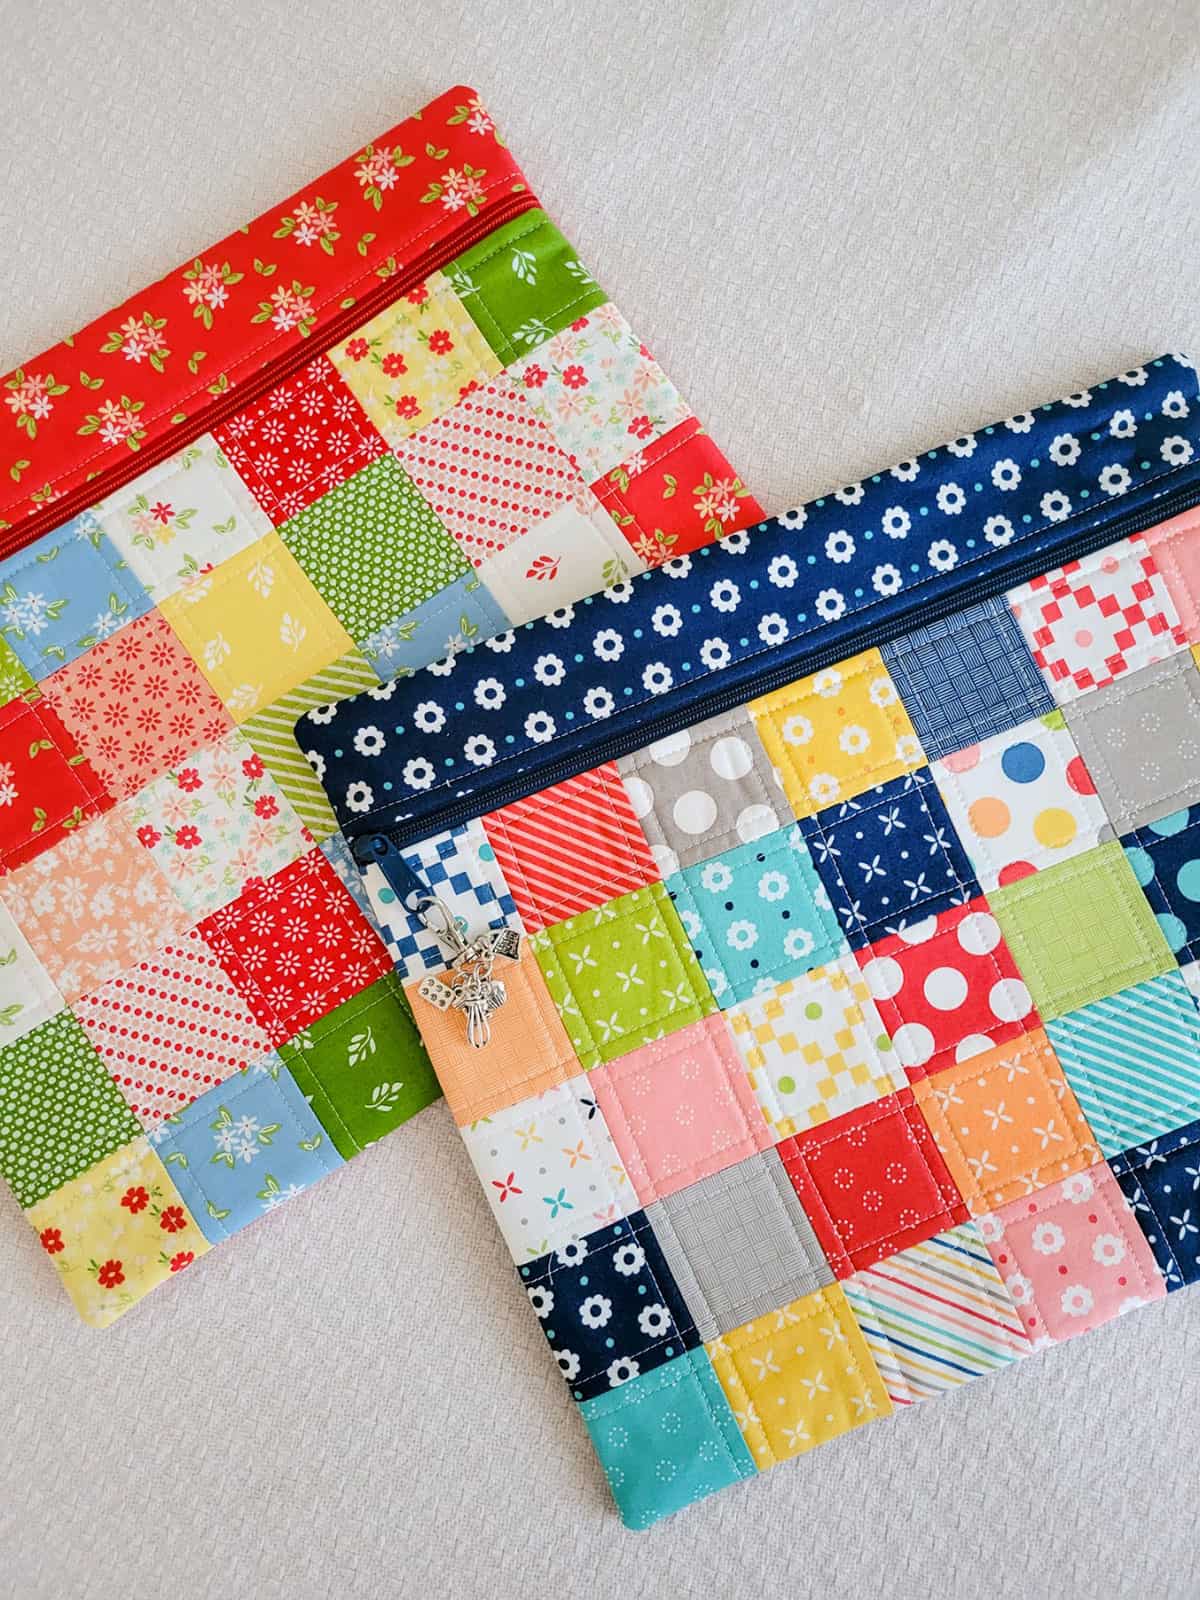 Project Bags, Quilts + Weekly Quilting Goals